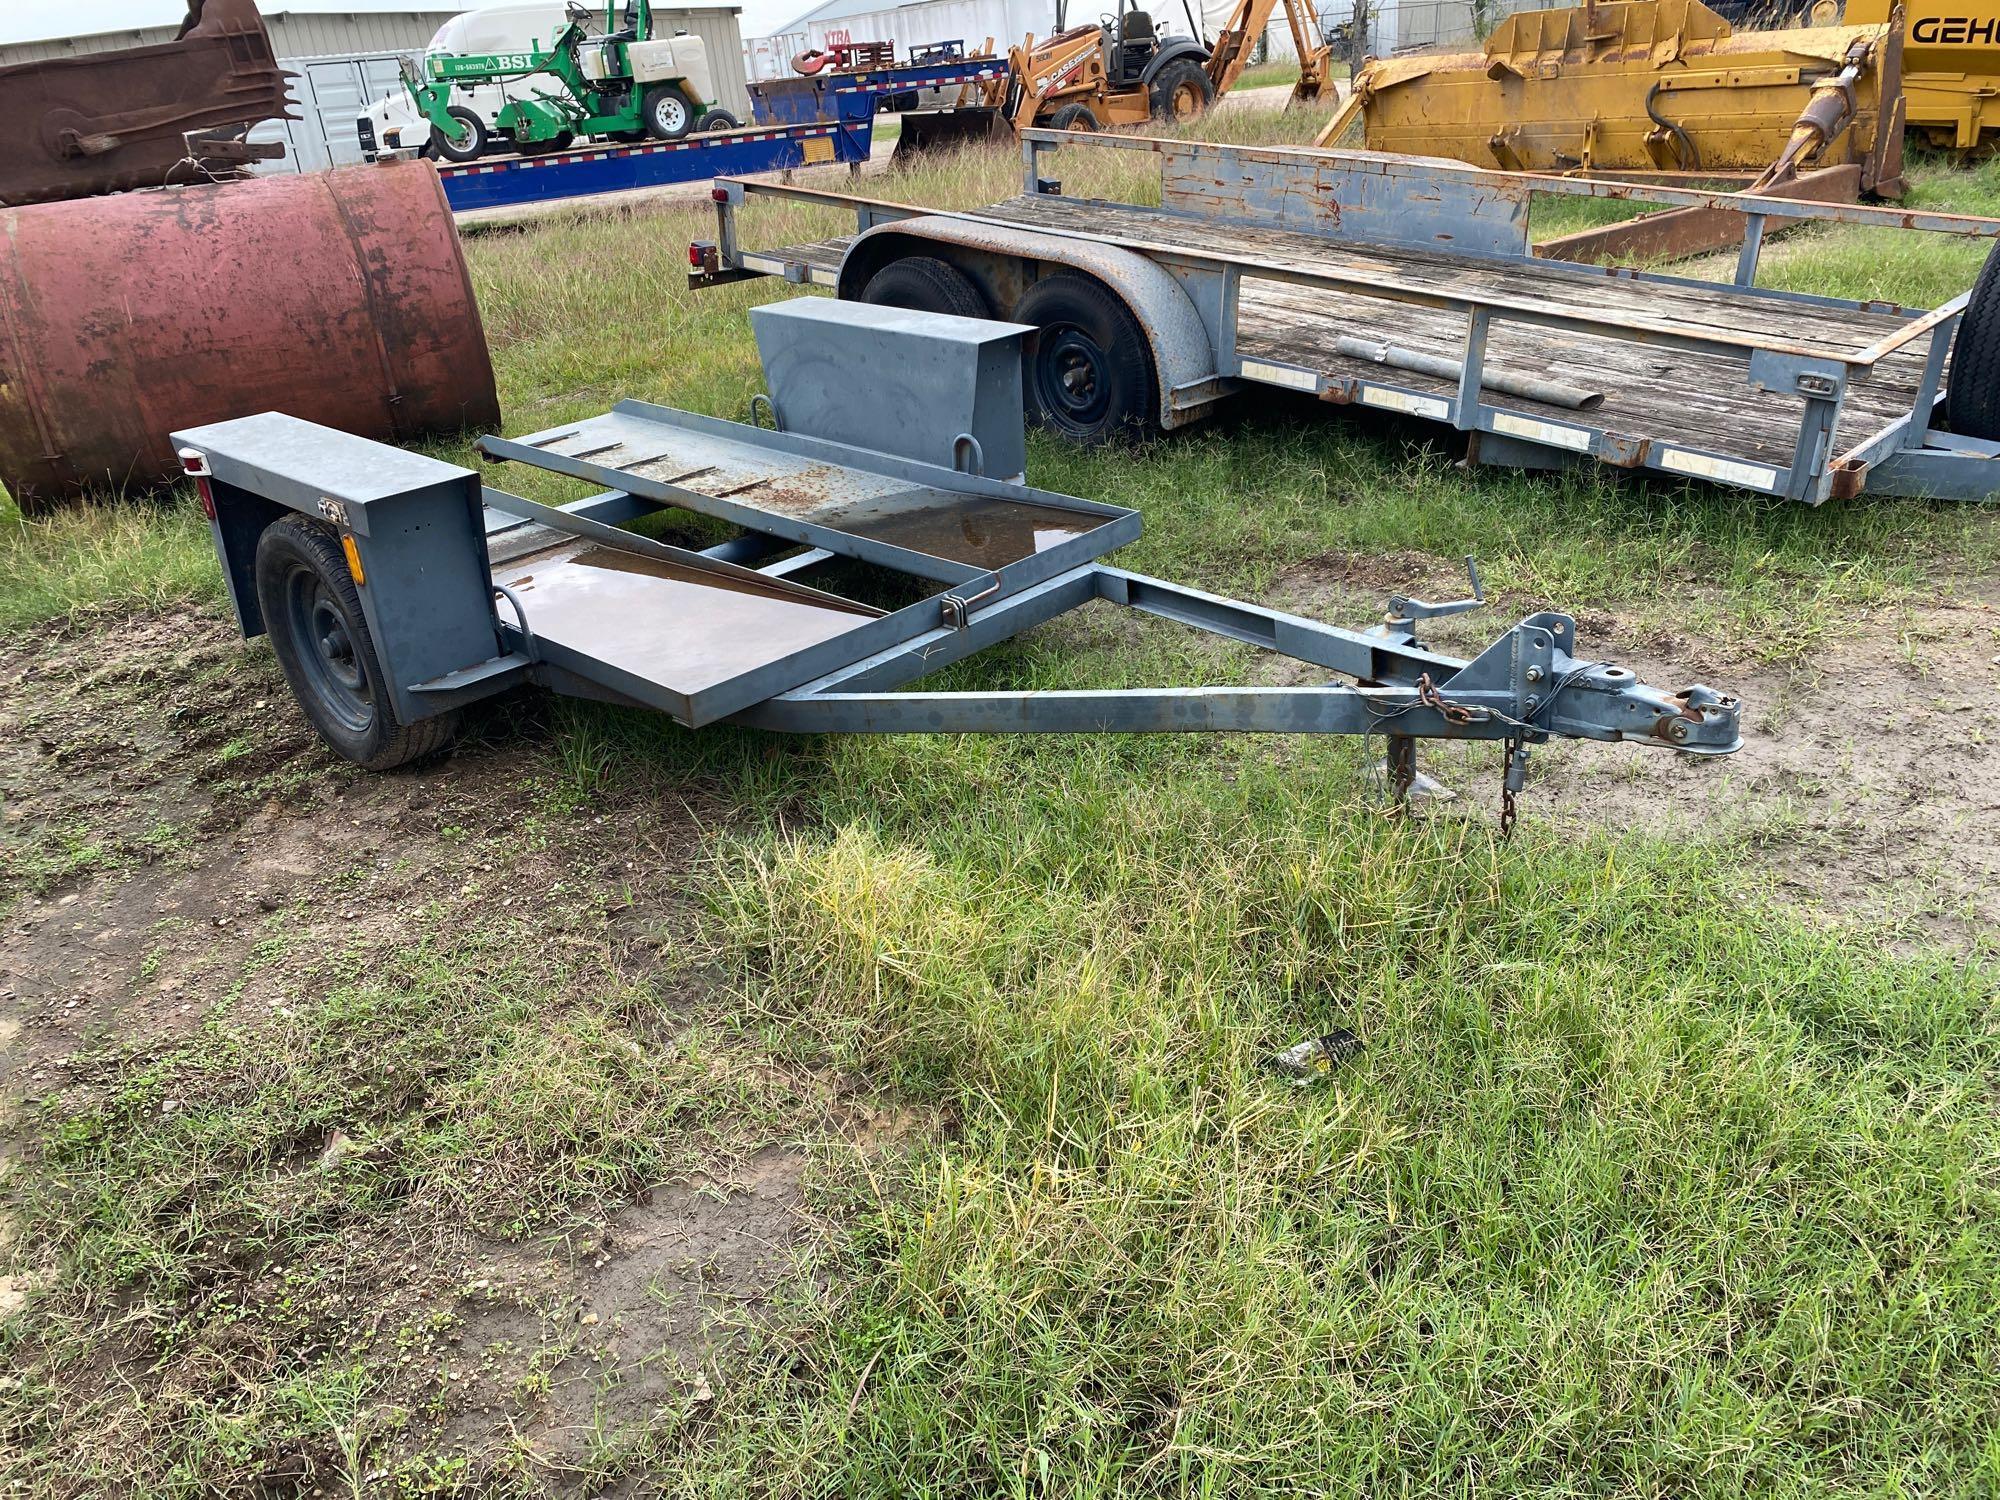 8FT. UTILITY TRAILER VN:N/A Equipped With 8ft. Deck